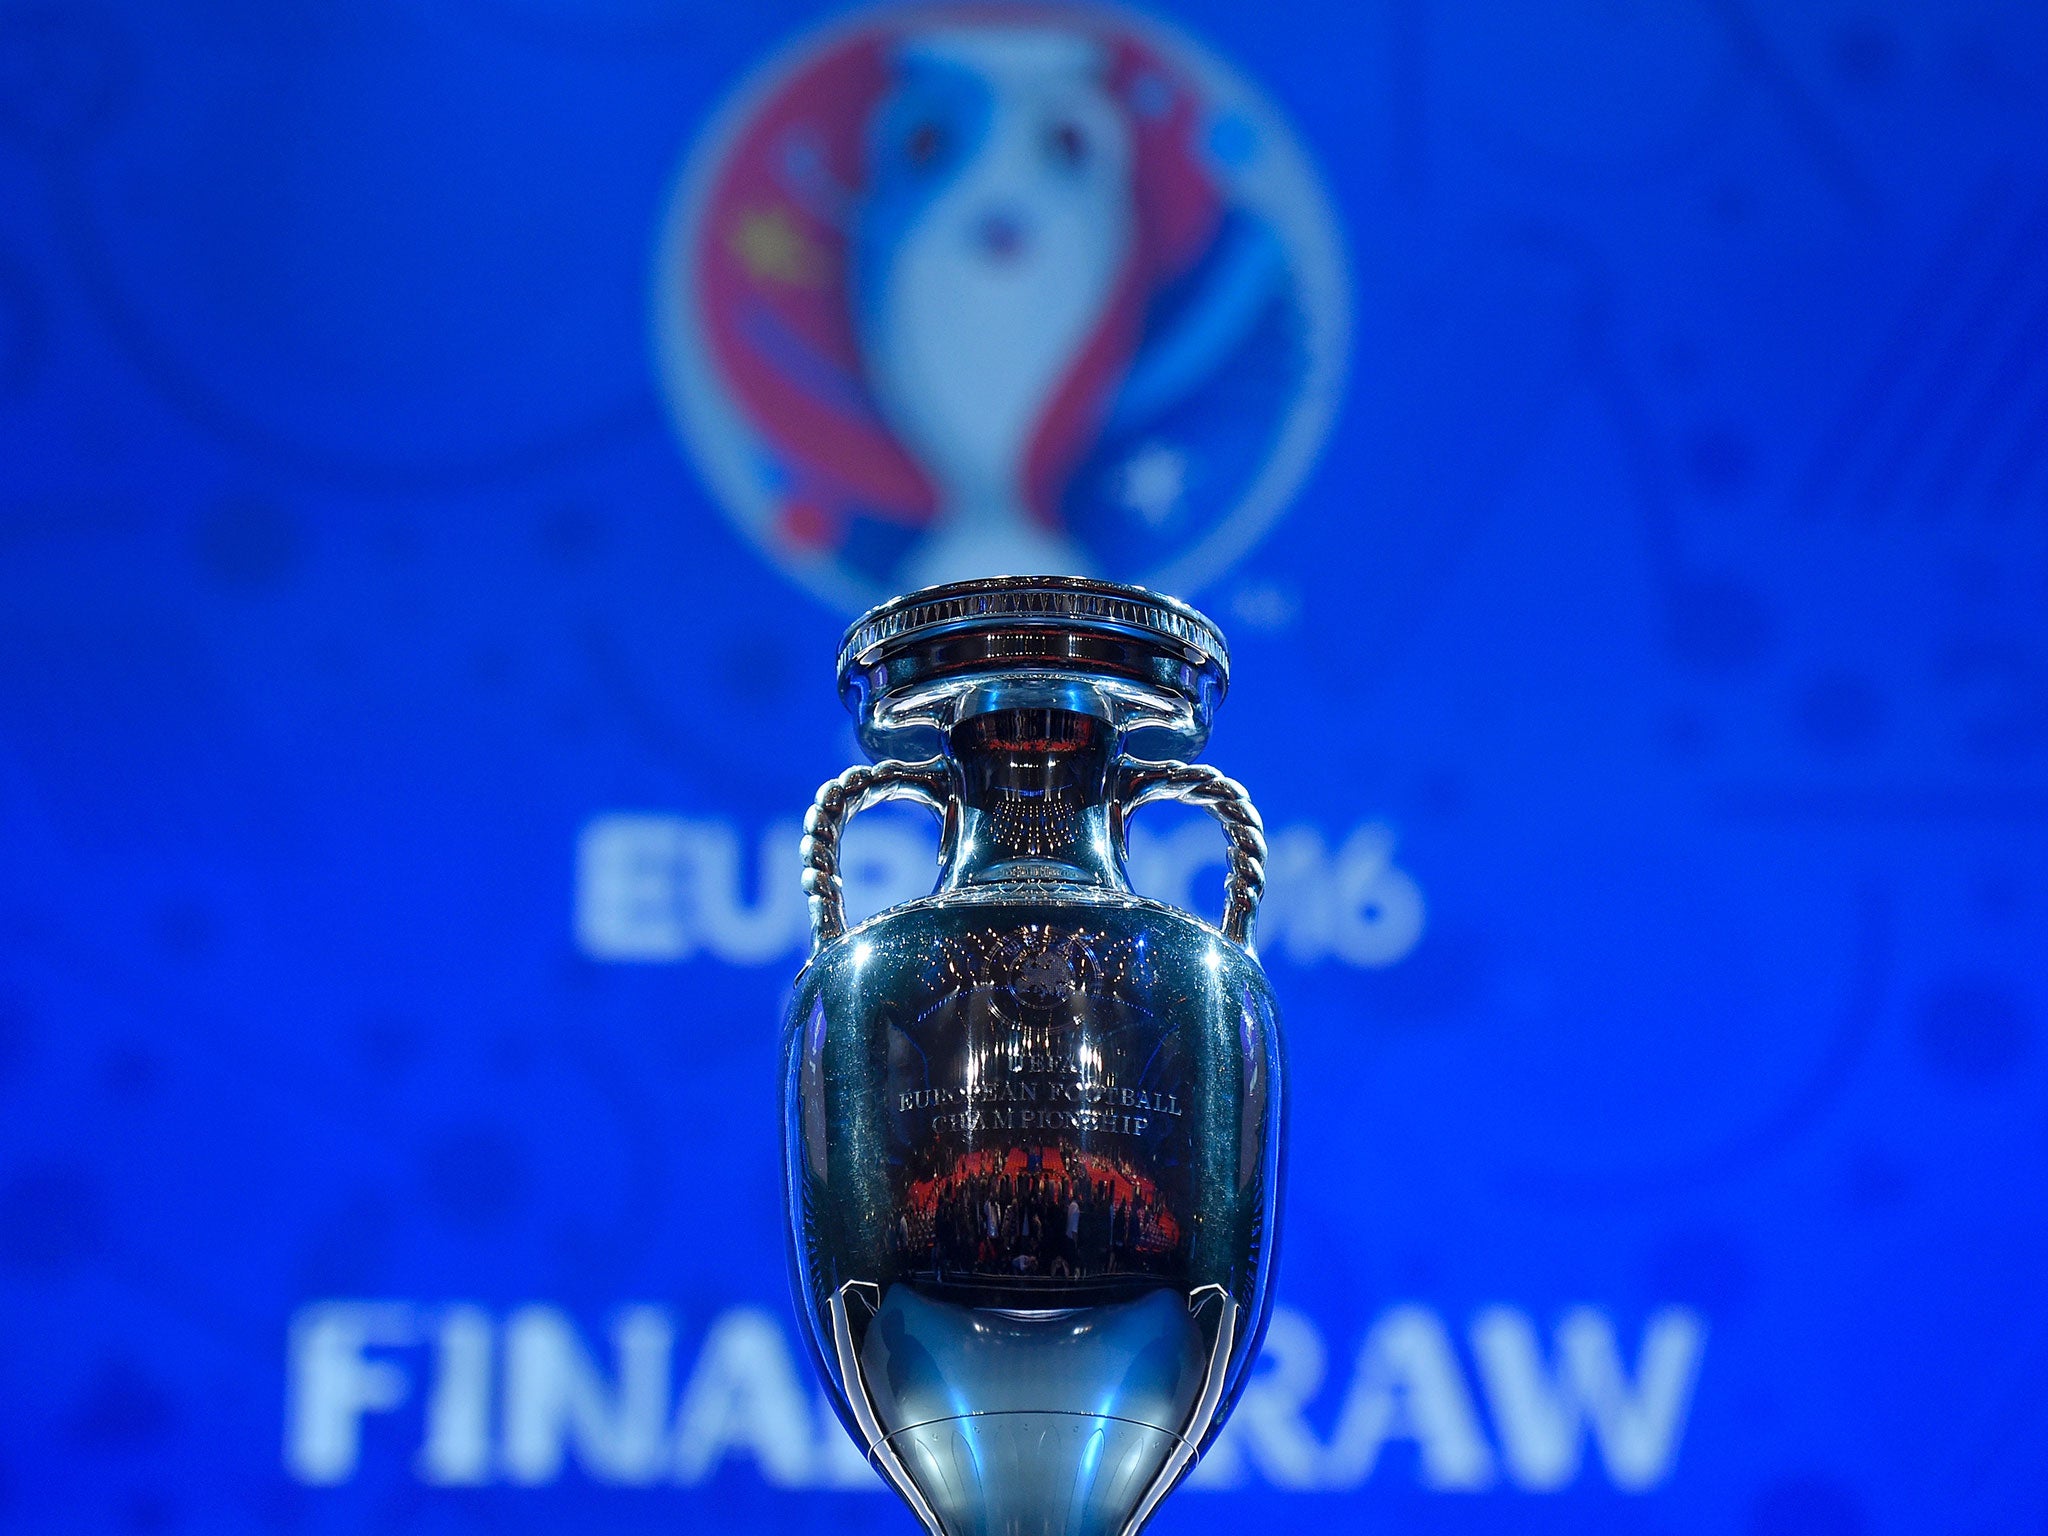 What it's all about: The Euro 2016 trophy